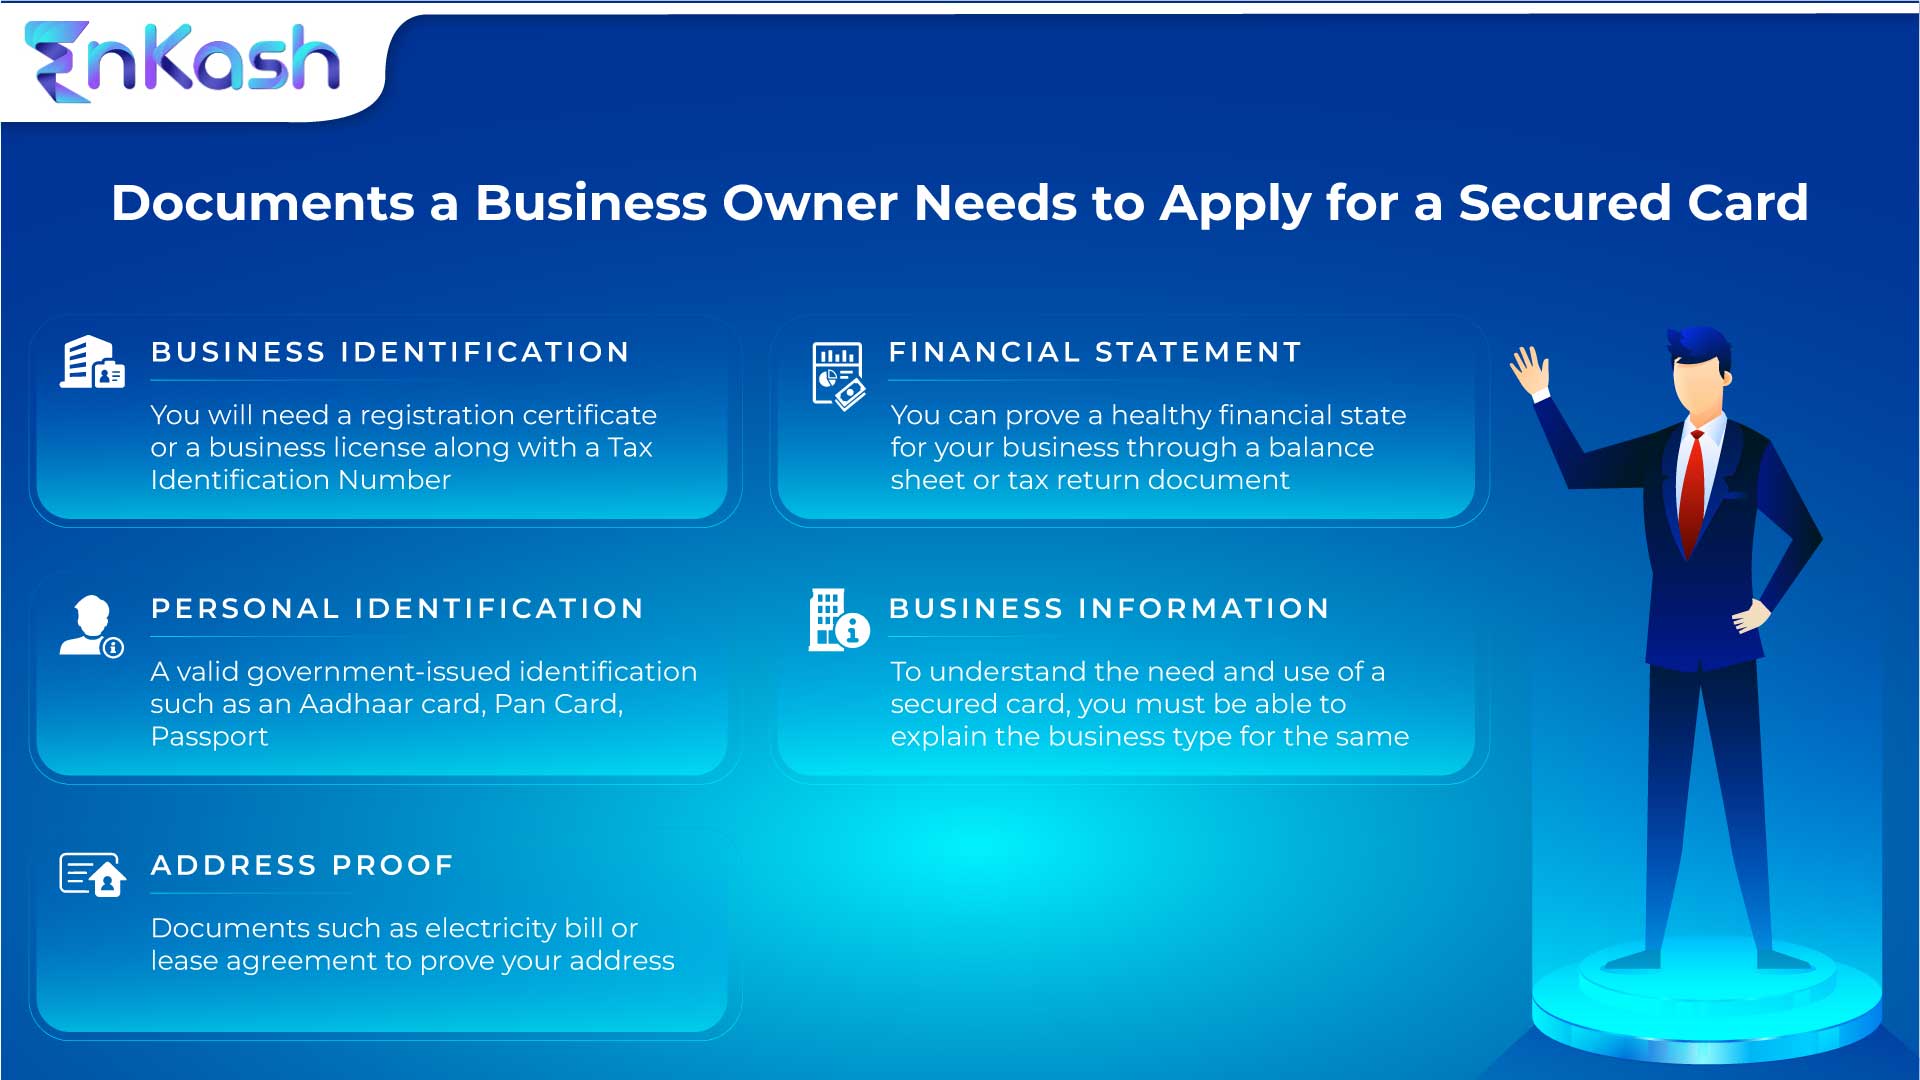 documents a business owner needs for a secured card